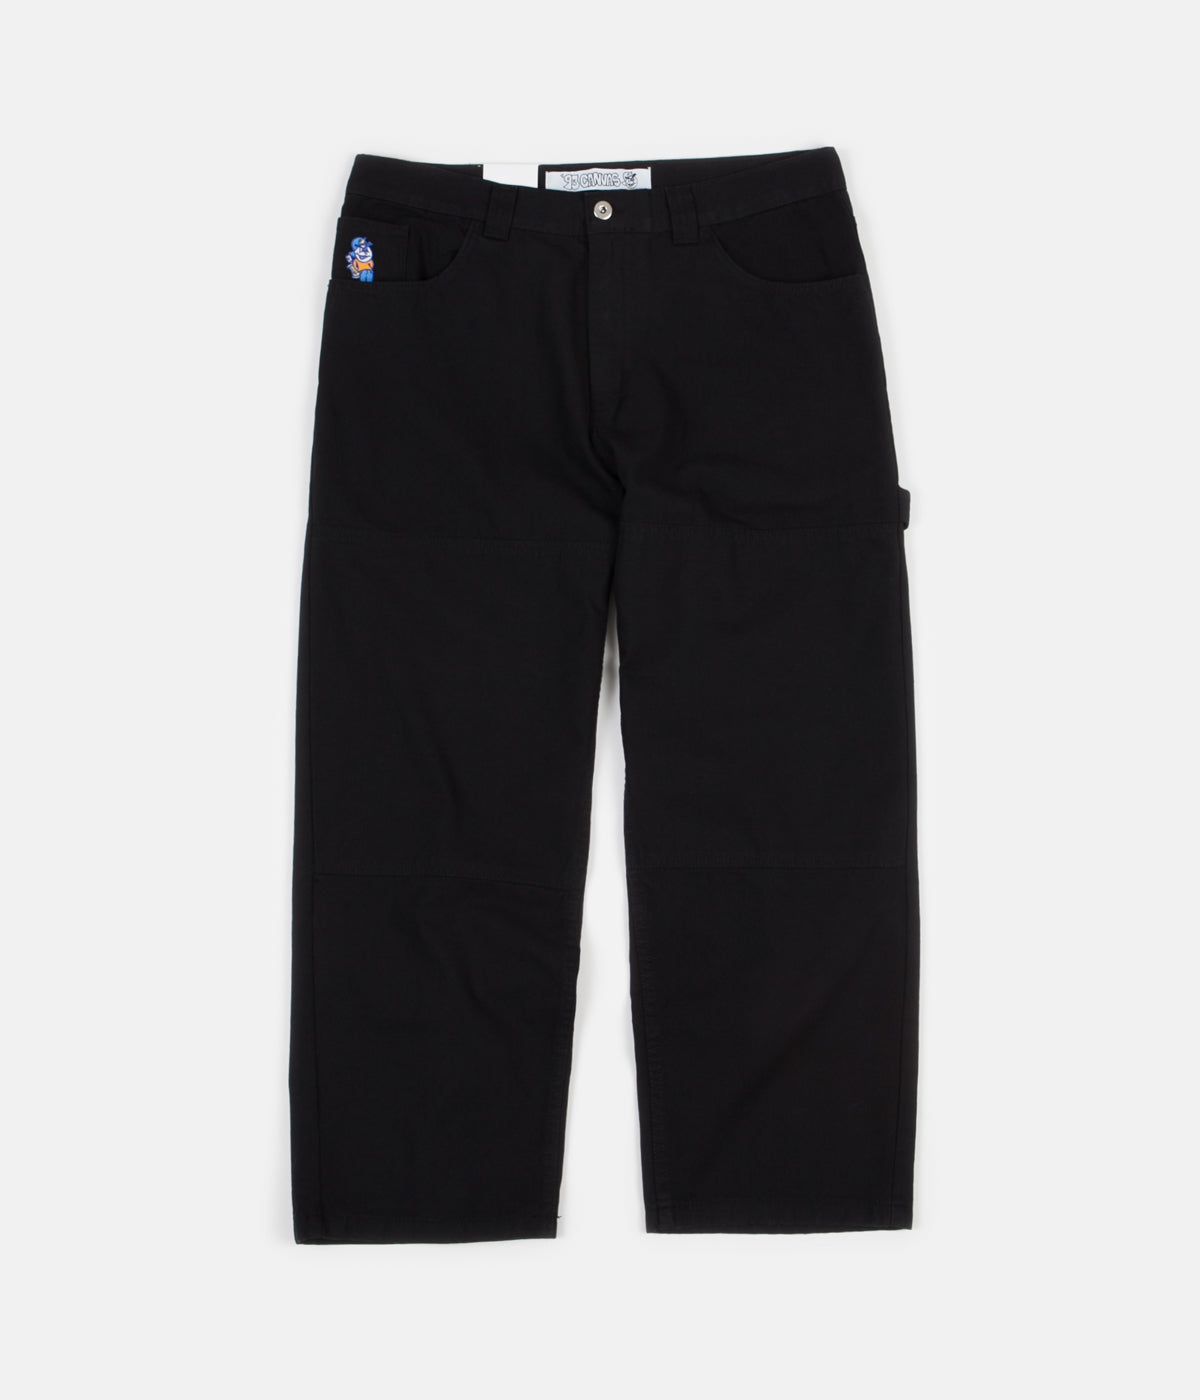 Dickies Duck Canvas Trousers- Black | Dickies Clothing annscottage.com